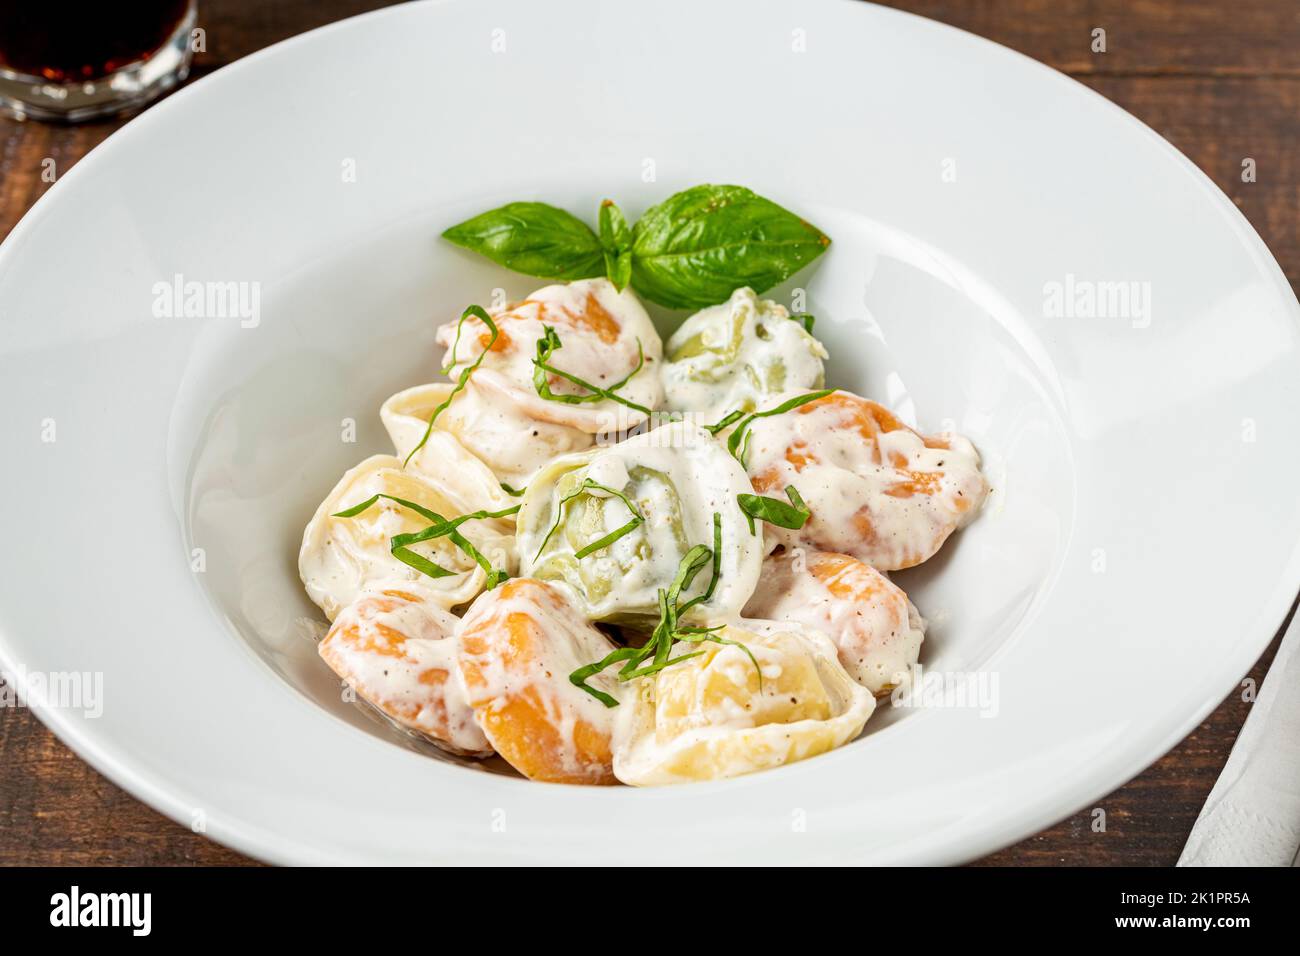 different types of pelmeni or russian dumplings in white plate on wooden background Stock Photo